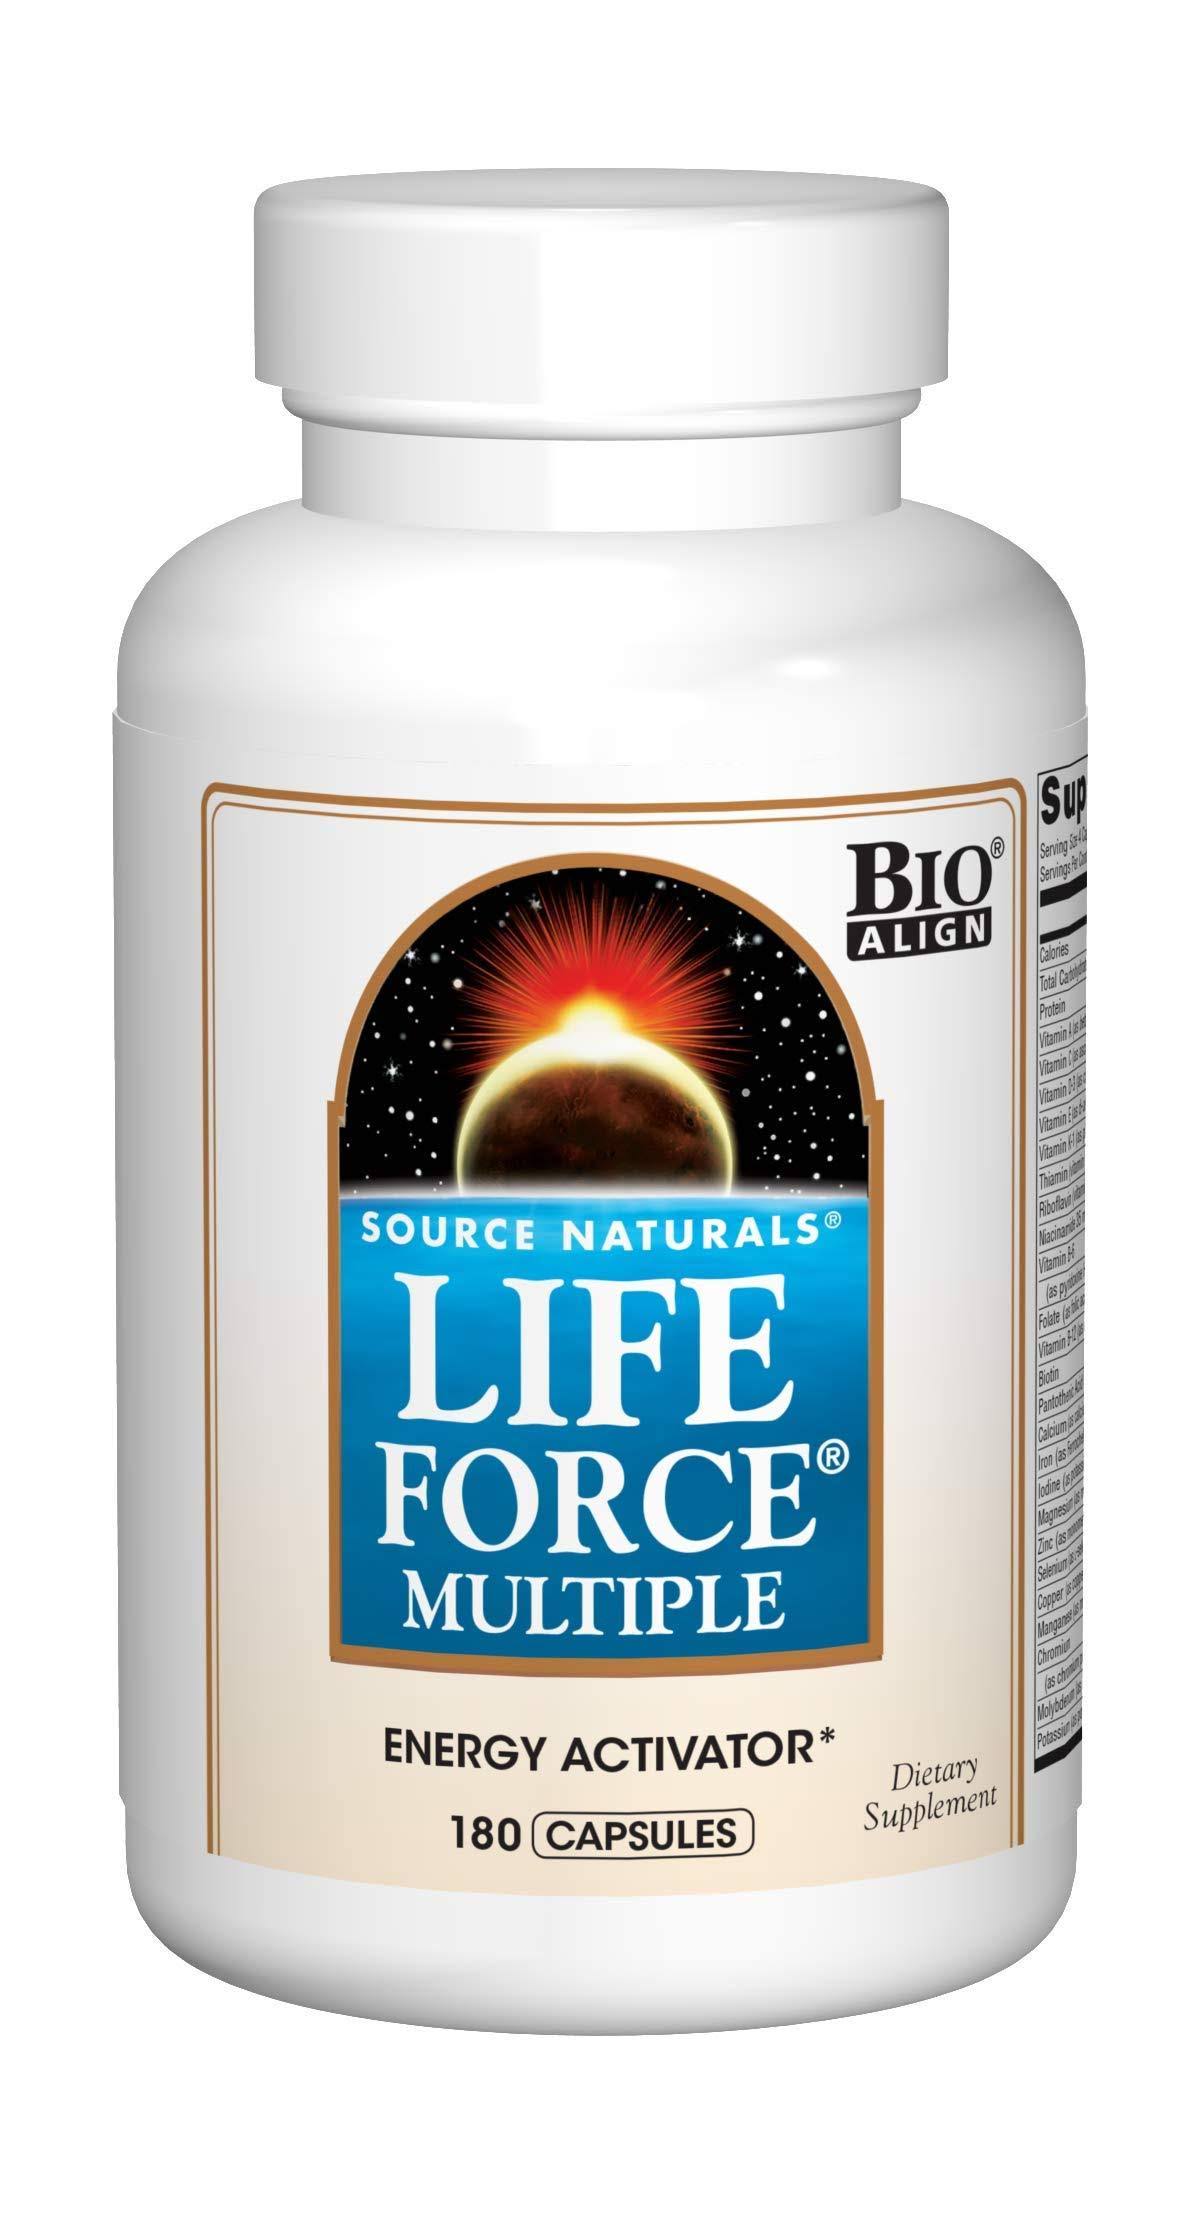 Source Naturals Life Force Multiple Energy Activator Supplement - 180 Capsules